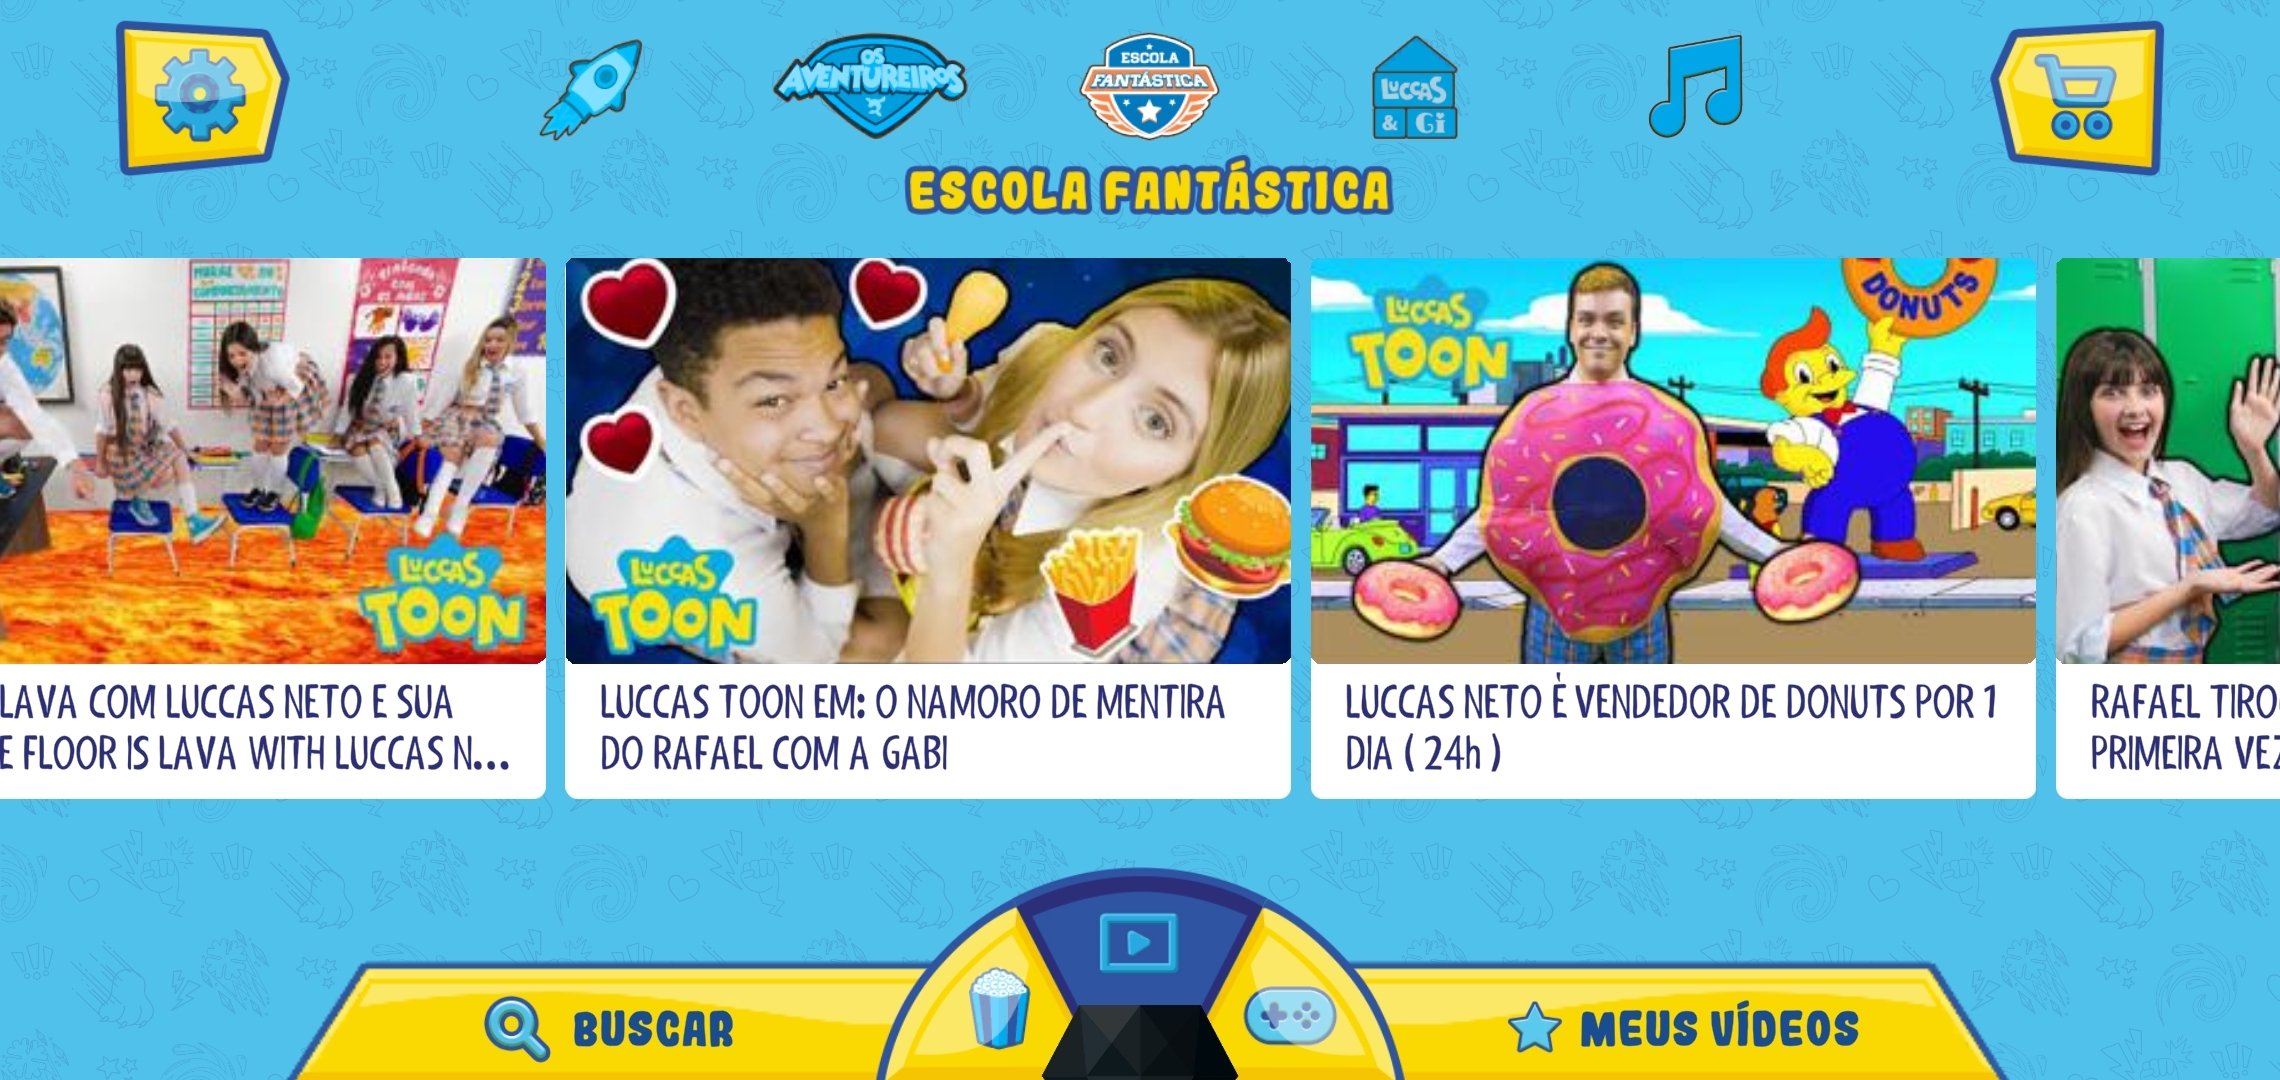 Irmaos Neto Vs Luccas Neto Vs Official Apk Download for Android- Latest  version 1.8- app.irmaosneto.luccasneto.official